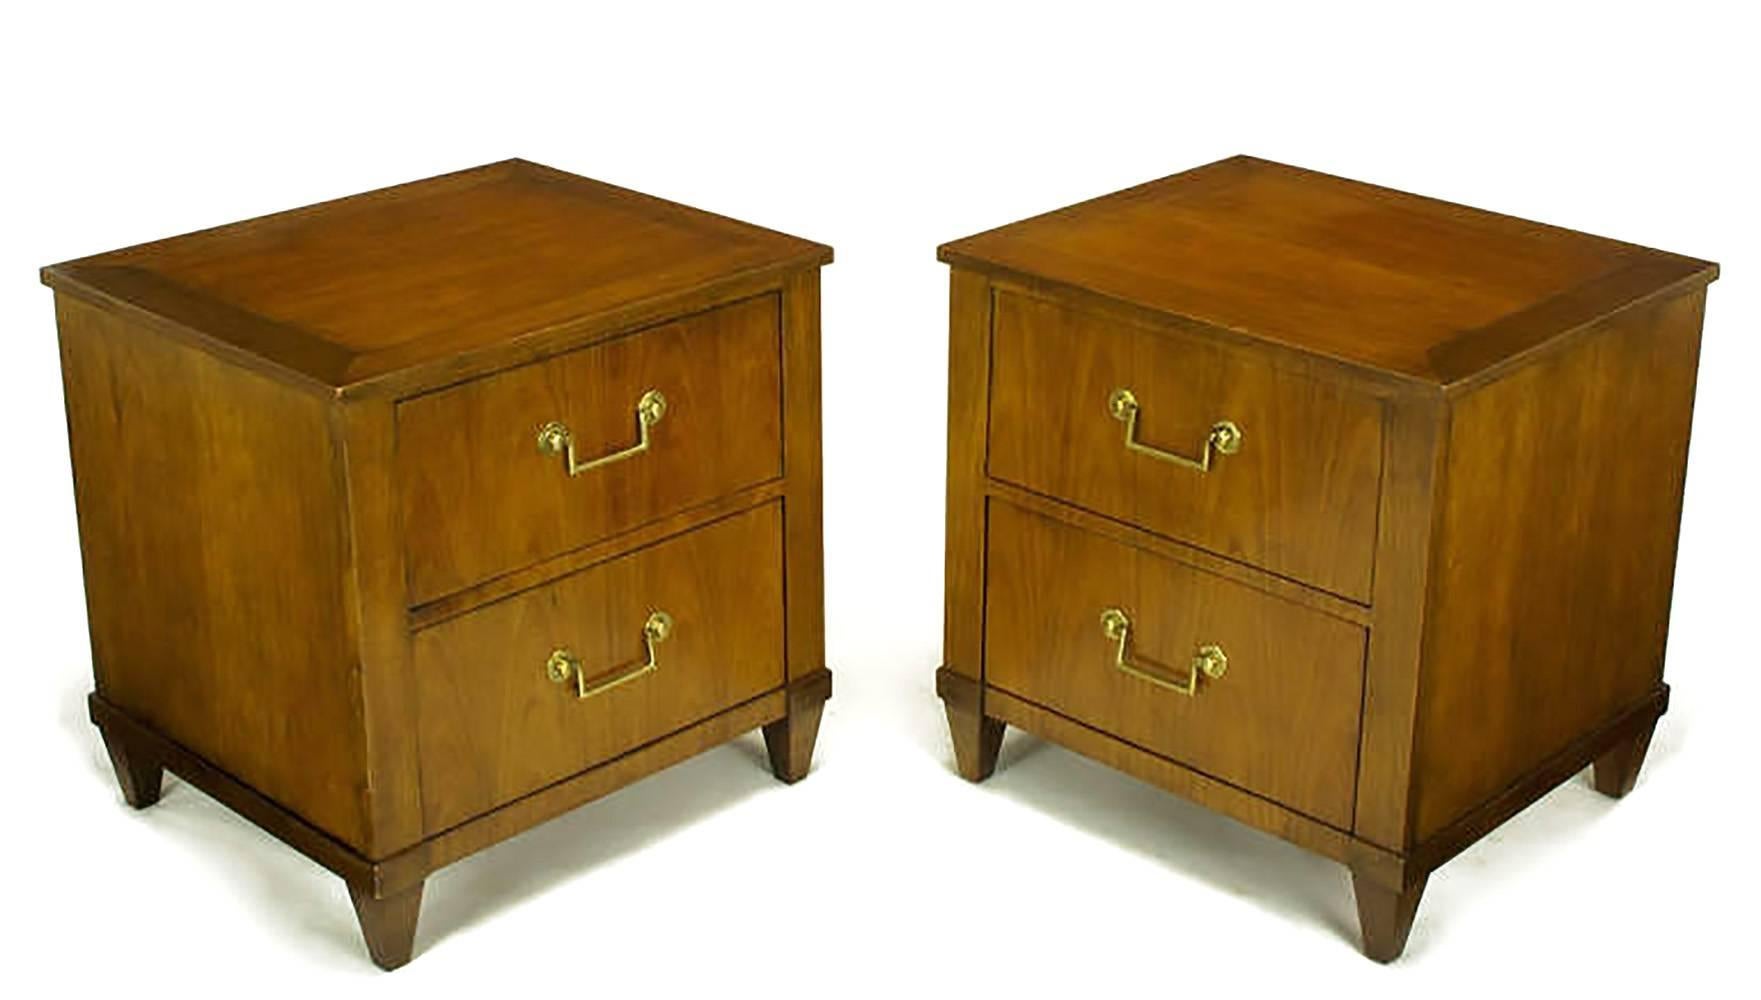 Unusual pair of Baker nightstands in figured French cherry, with brass bail drop pulls and round escutcheons. Transitional style with a single drawer and a fall front storage space above. Could also be used as end tables as they are finished on all